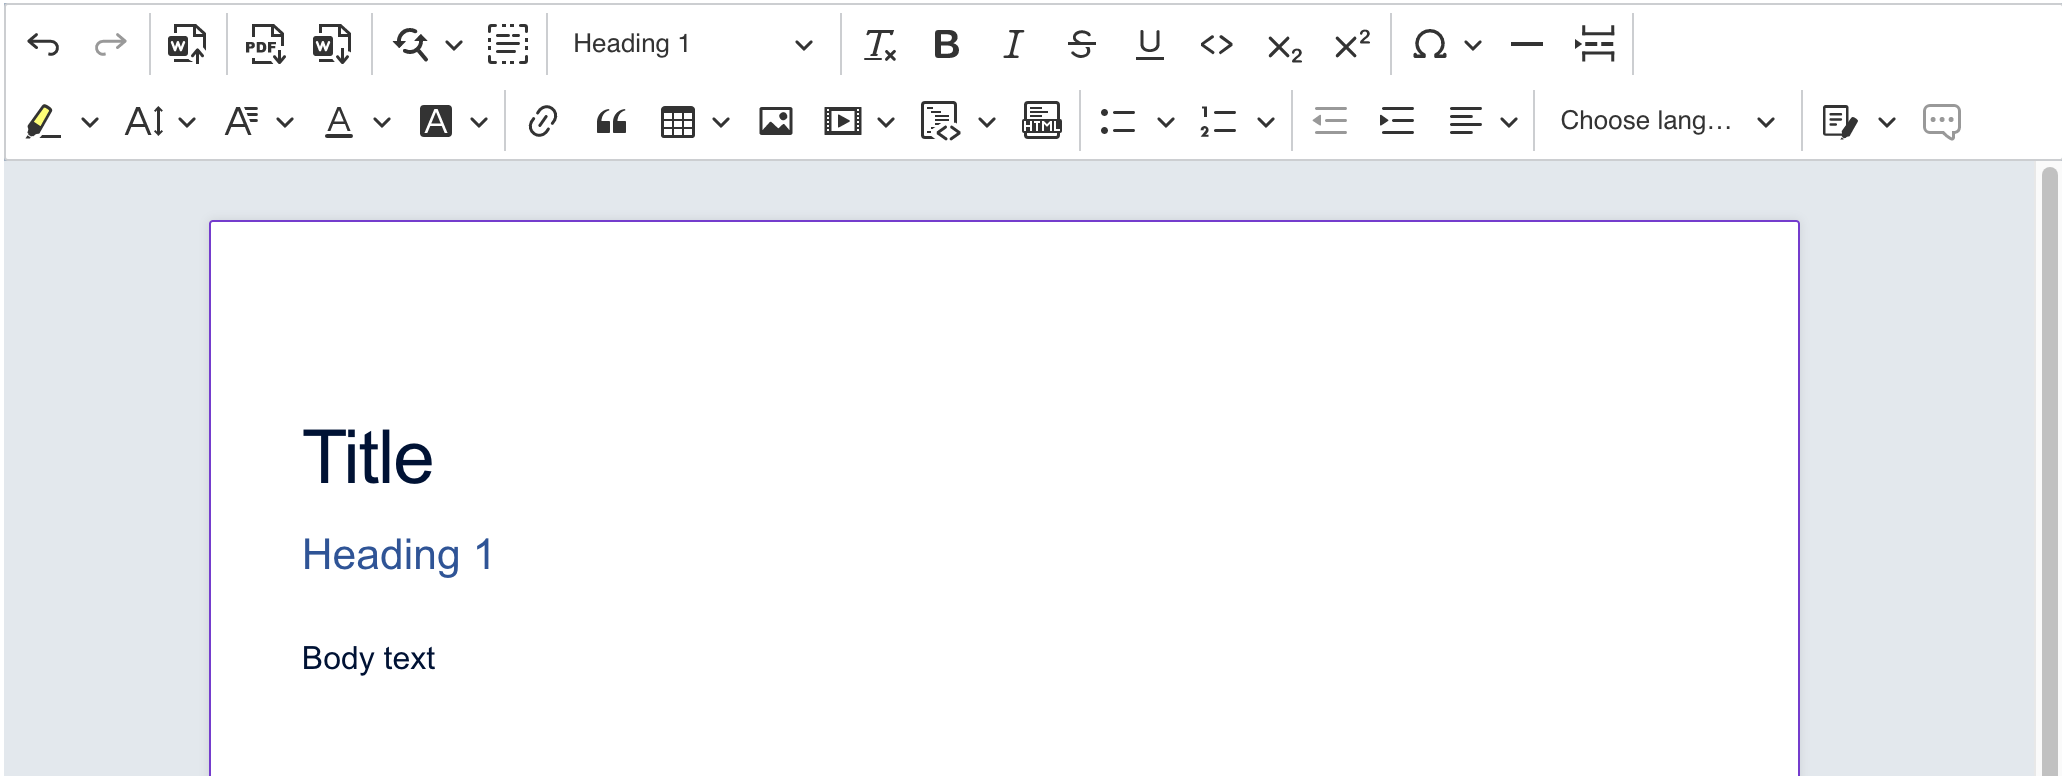 Word styles pane in CKEditor 5.